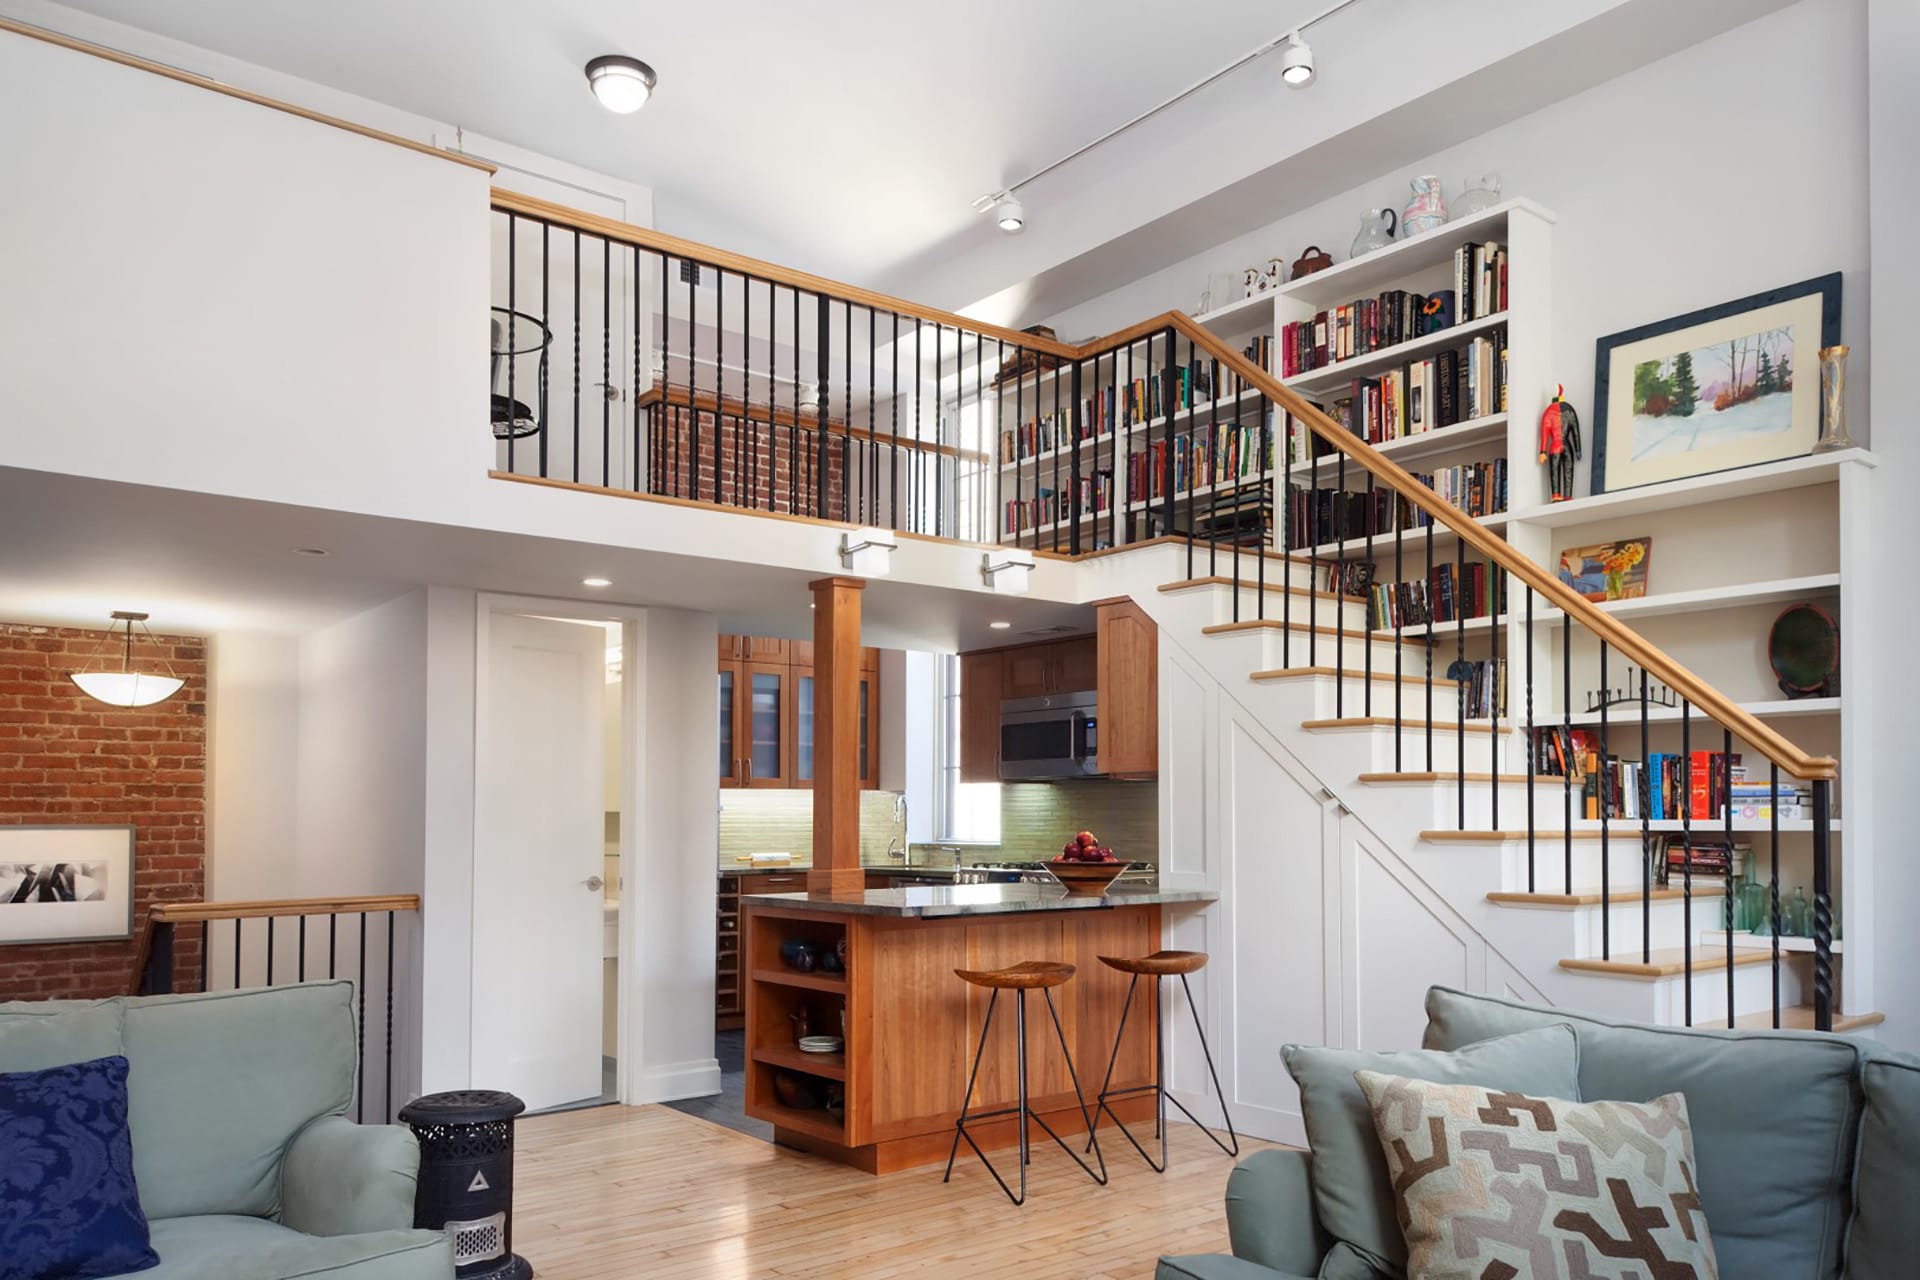 Main living space of a loft apartment with an open kitchen, staircase lined with bookshelves, and metal railings opening the loft space to below.